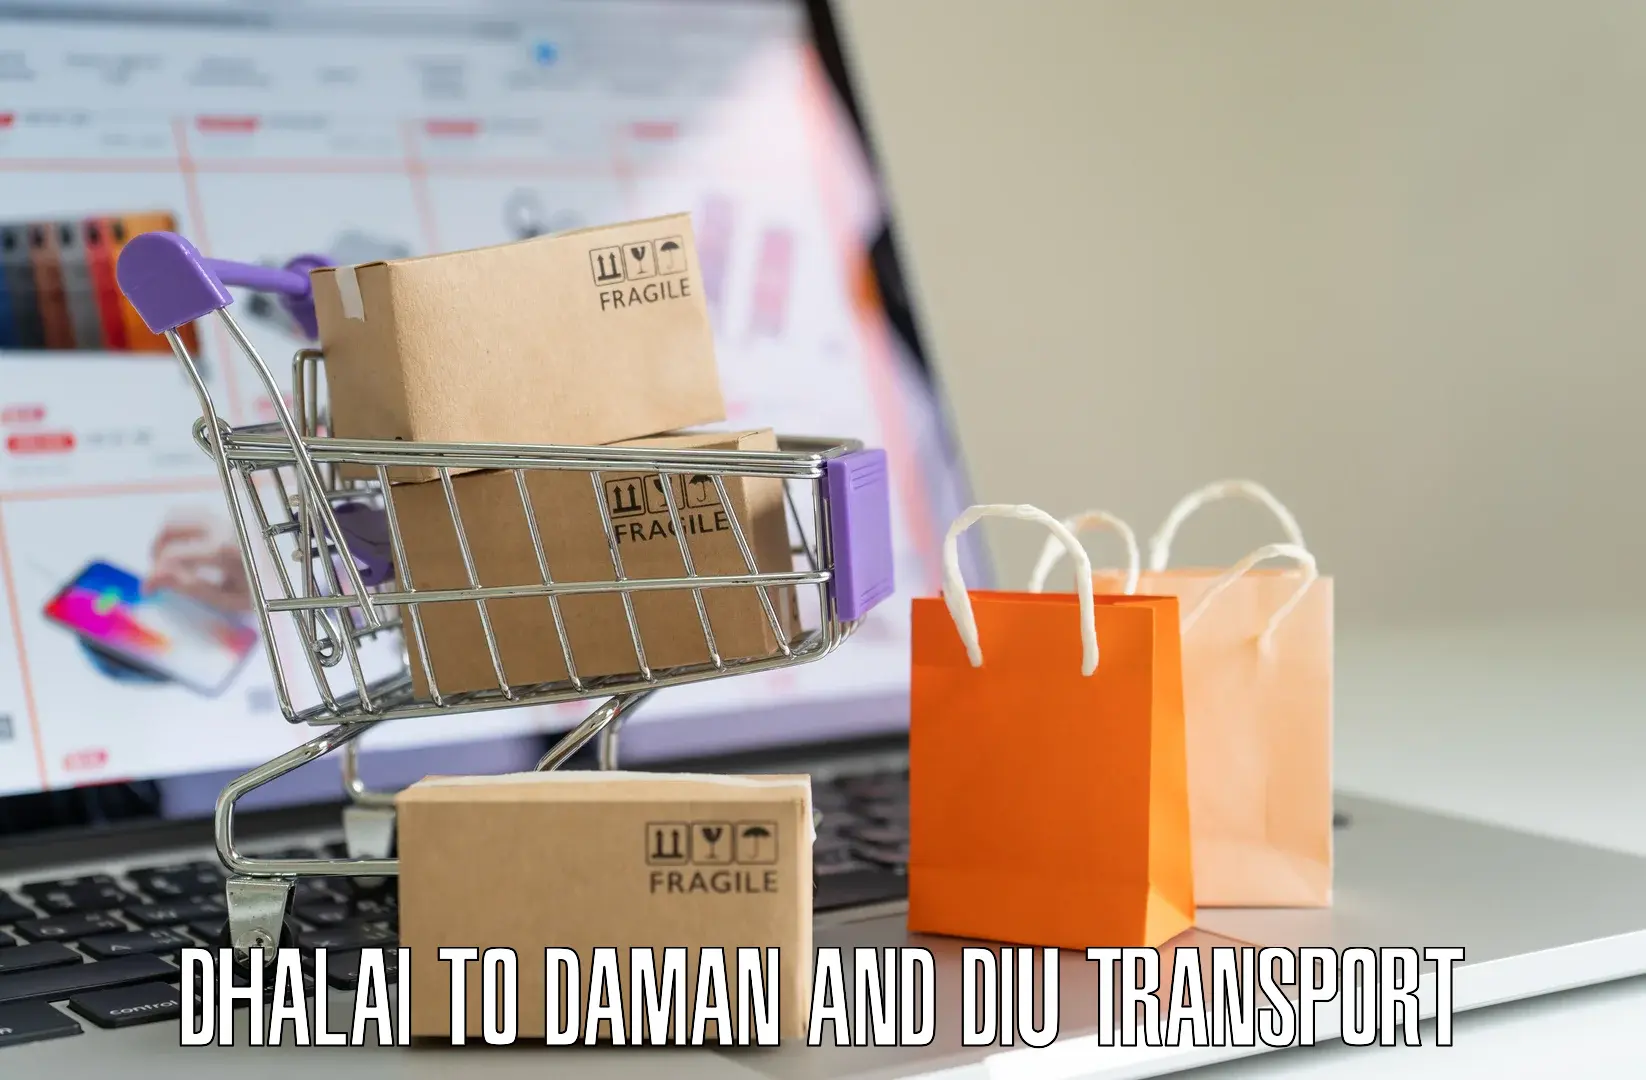 Commercial transport service Dhalai to Diu